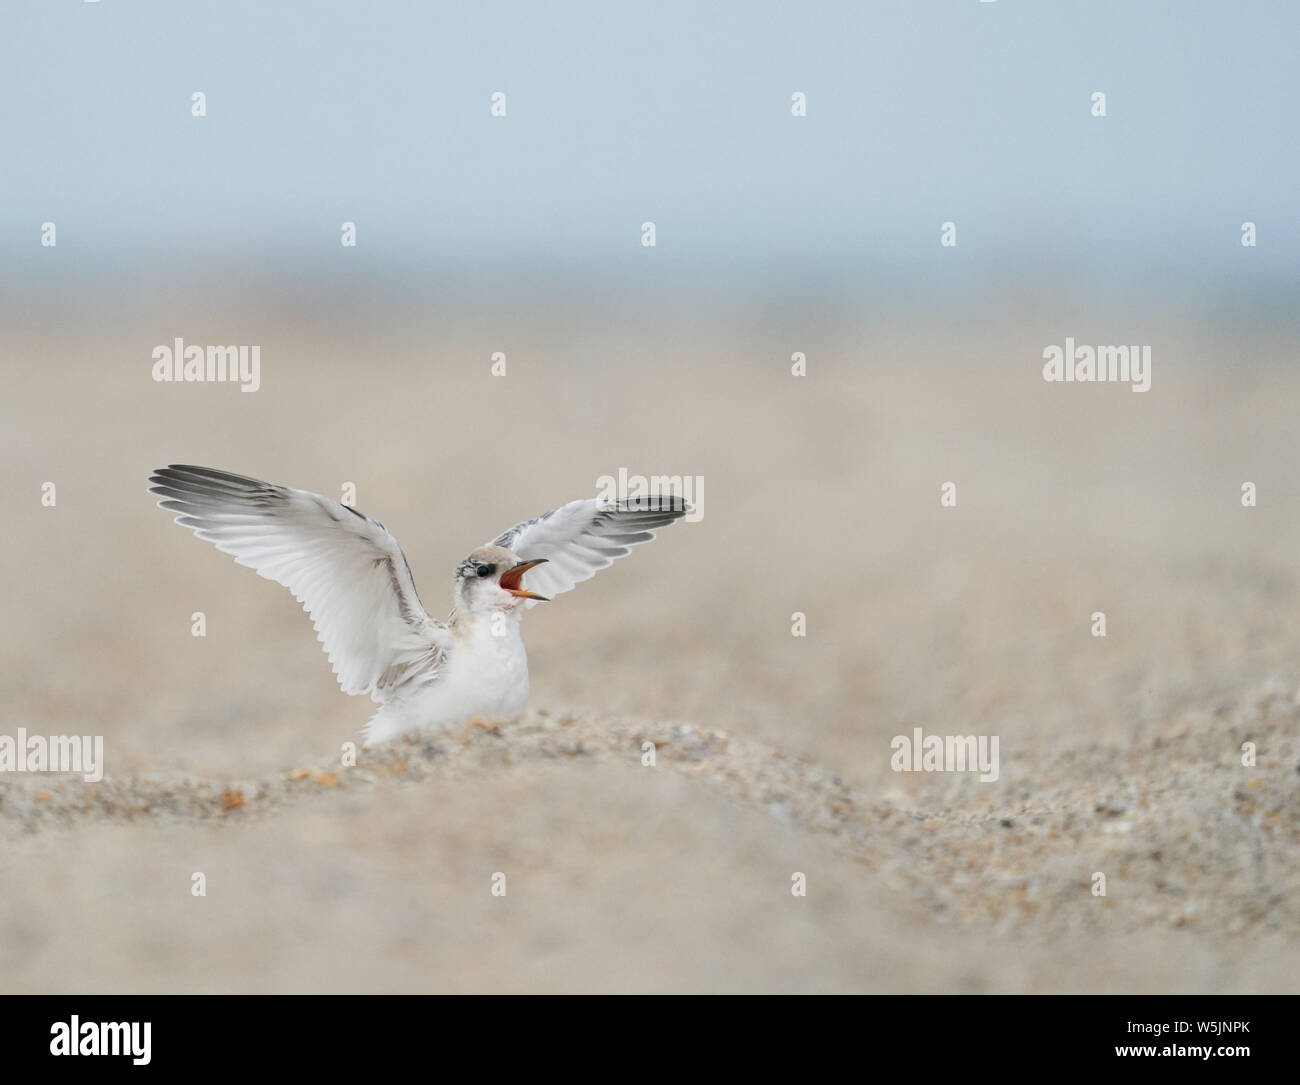 A Least tern chick attracts the attention of its parent at Wrightsville Beach, Wilmington, North Carolina Stock Photo